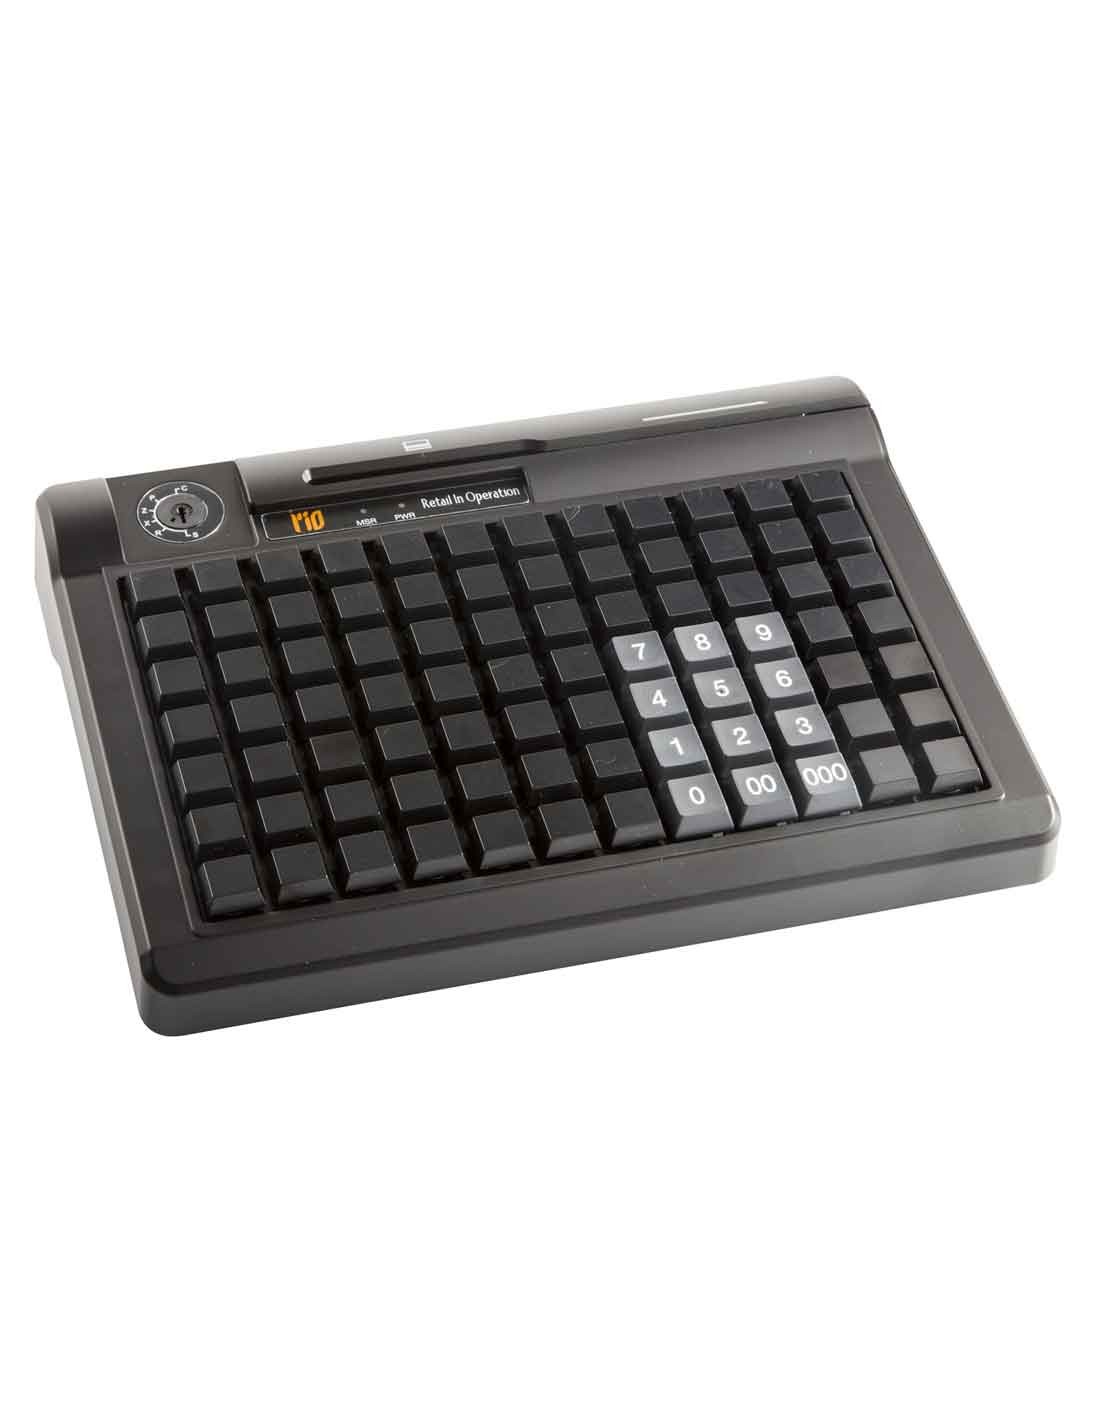 RIO 304 POS Programmable Keyboard at a Cheap Price in Dubai Online Store